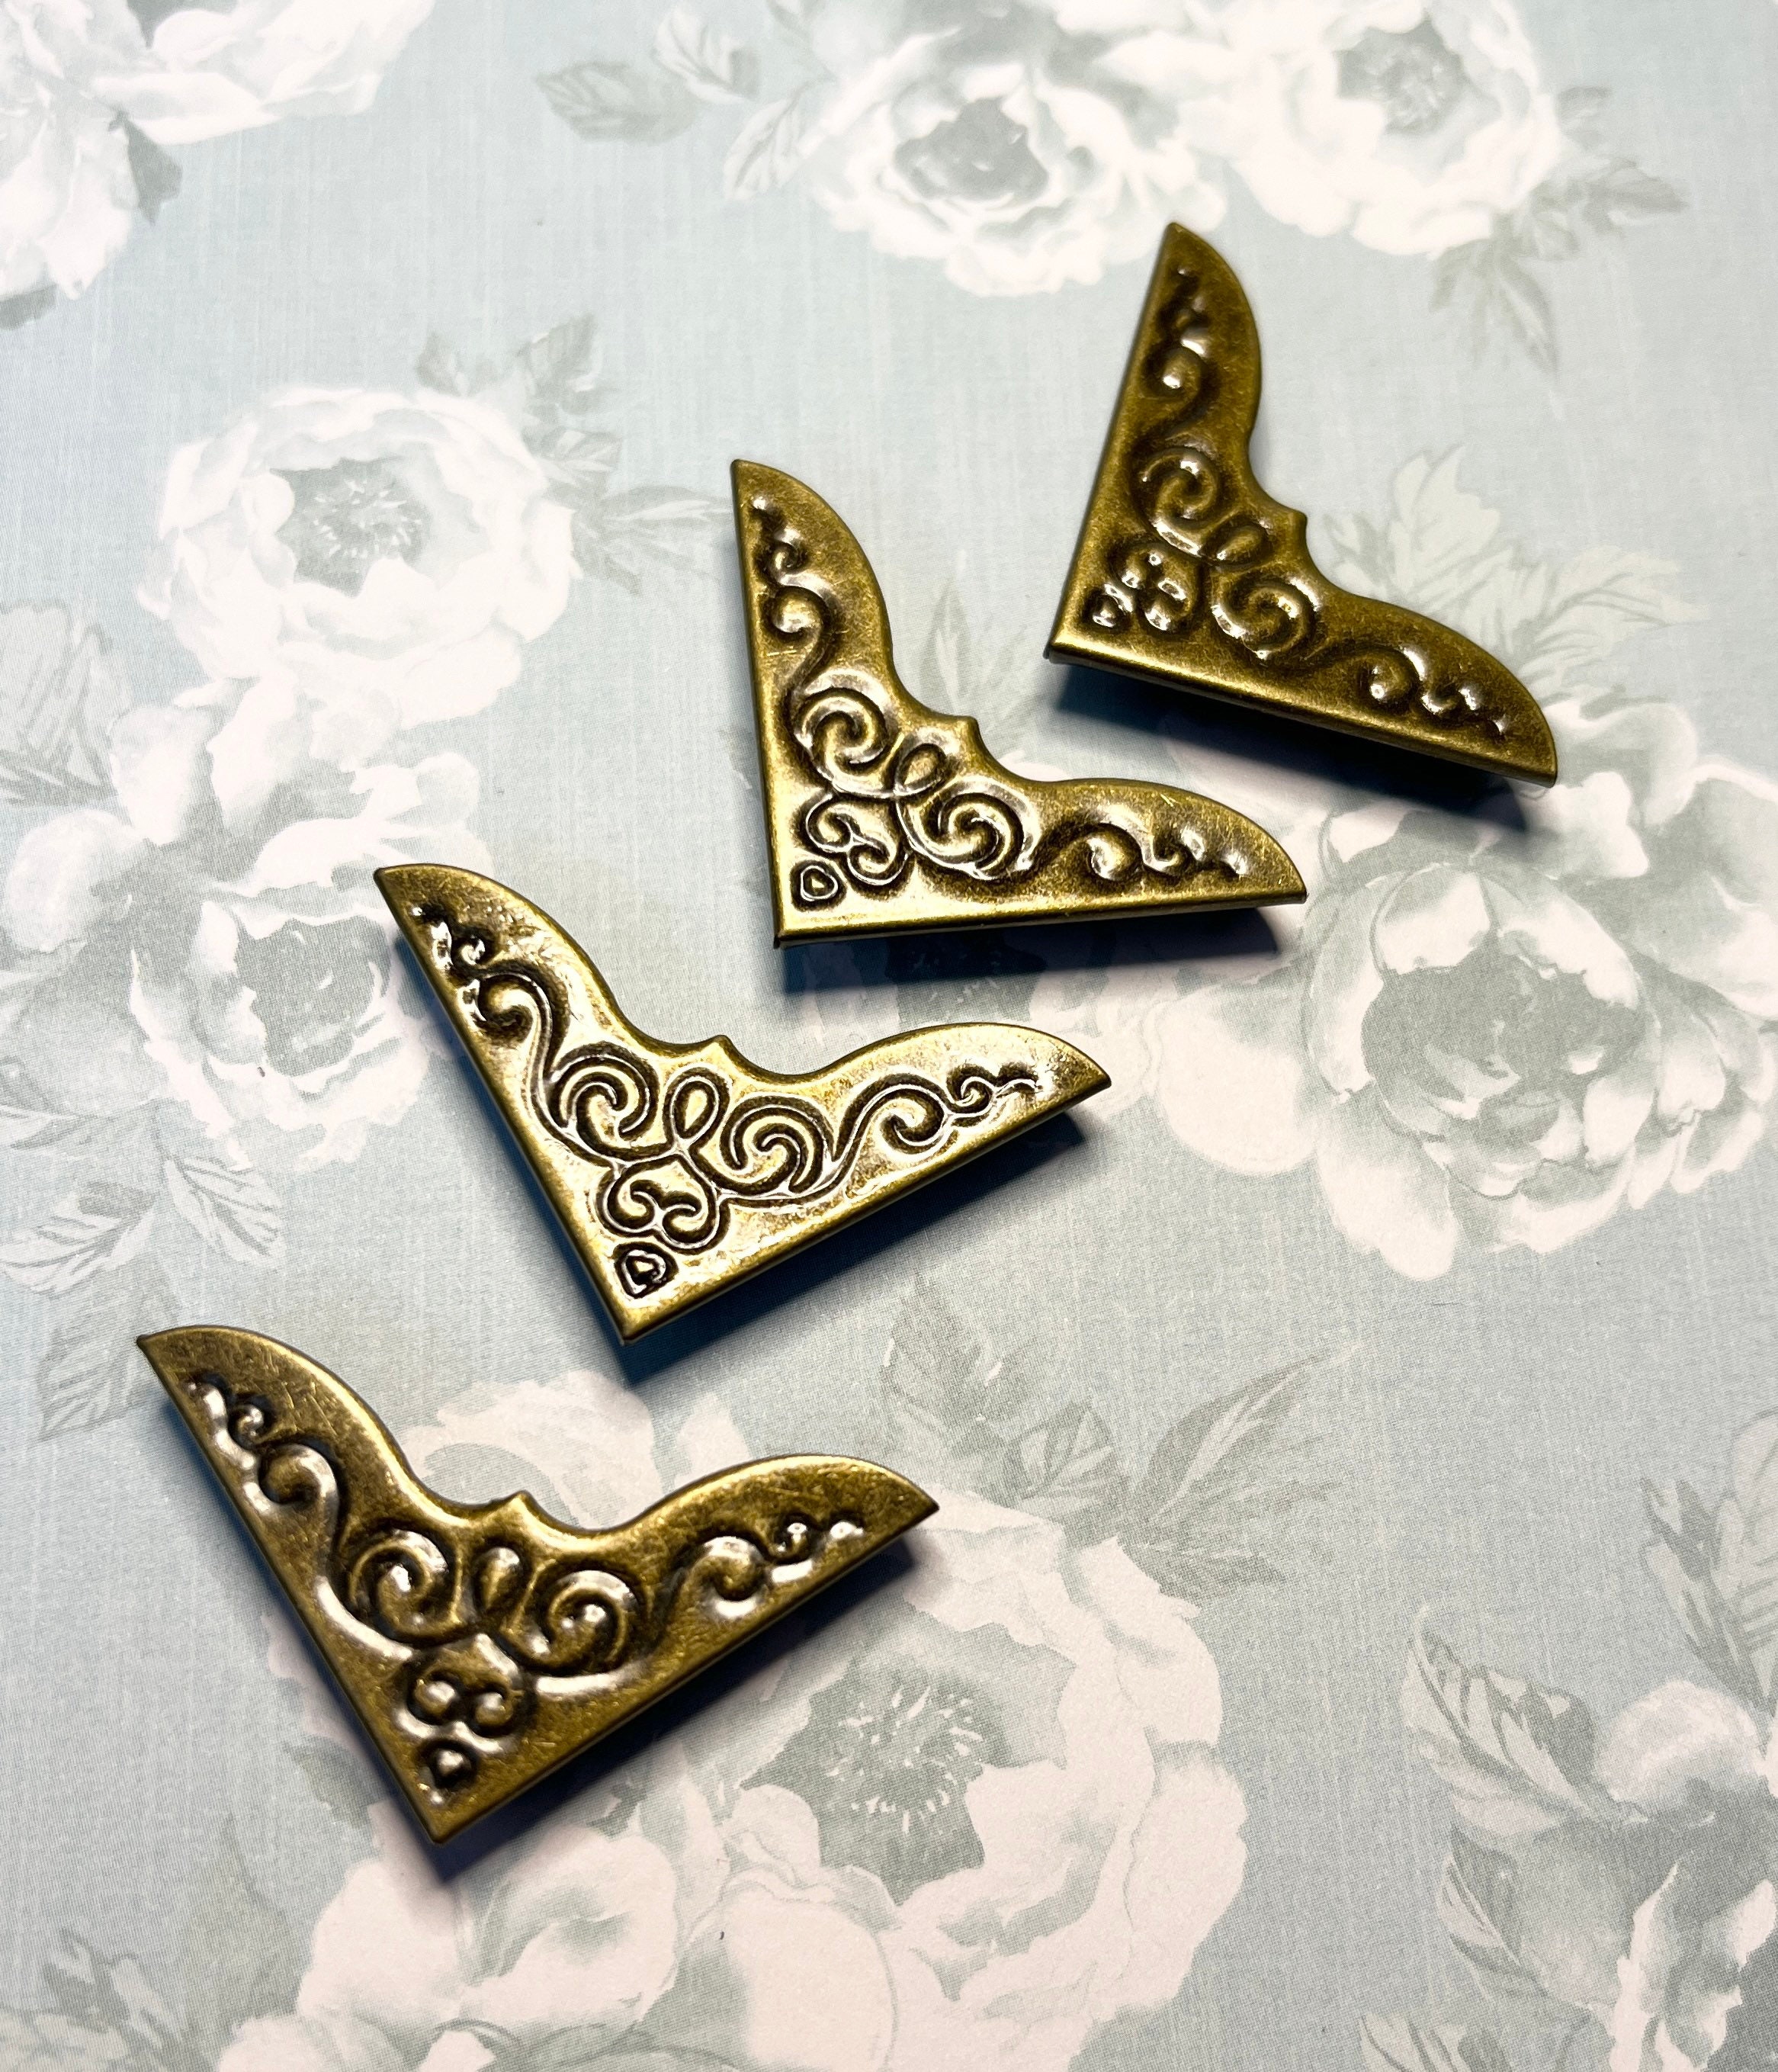 book corners, antique brass color, Set of four metal , embellishments for  the corners of your books, book corner protection.